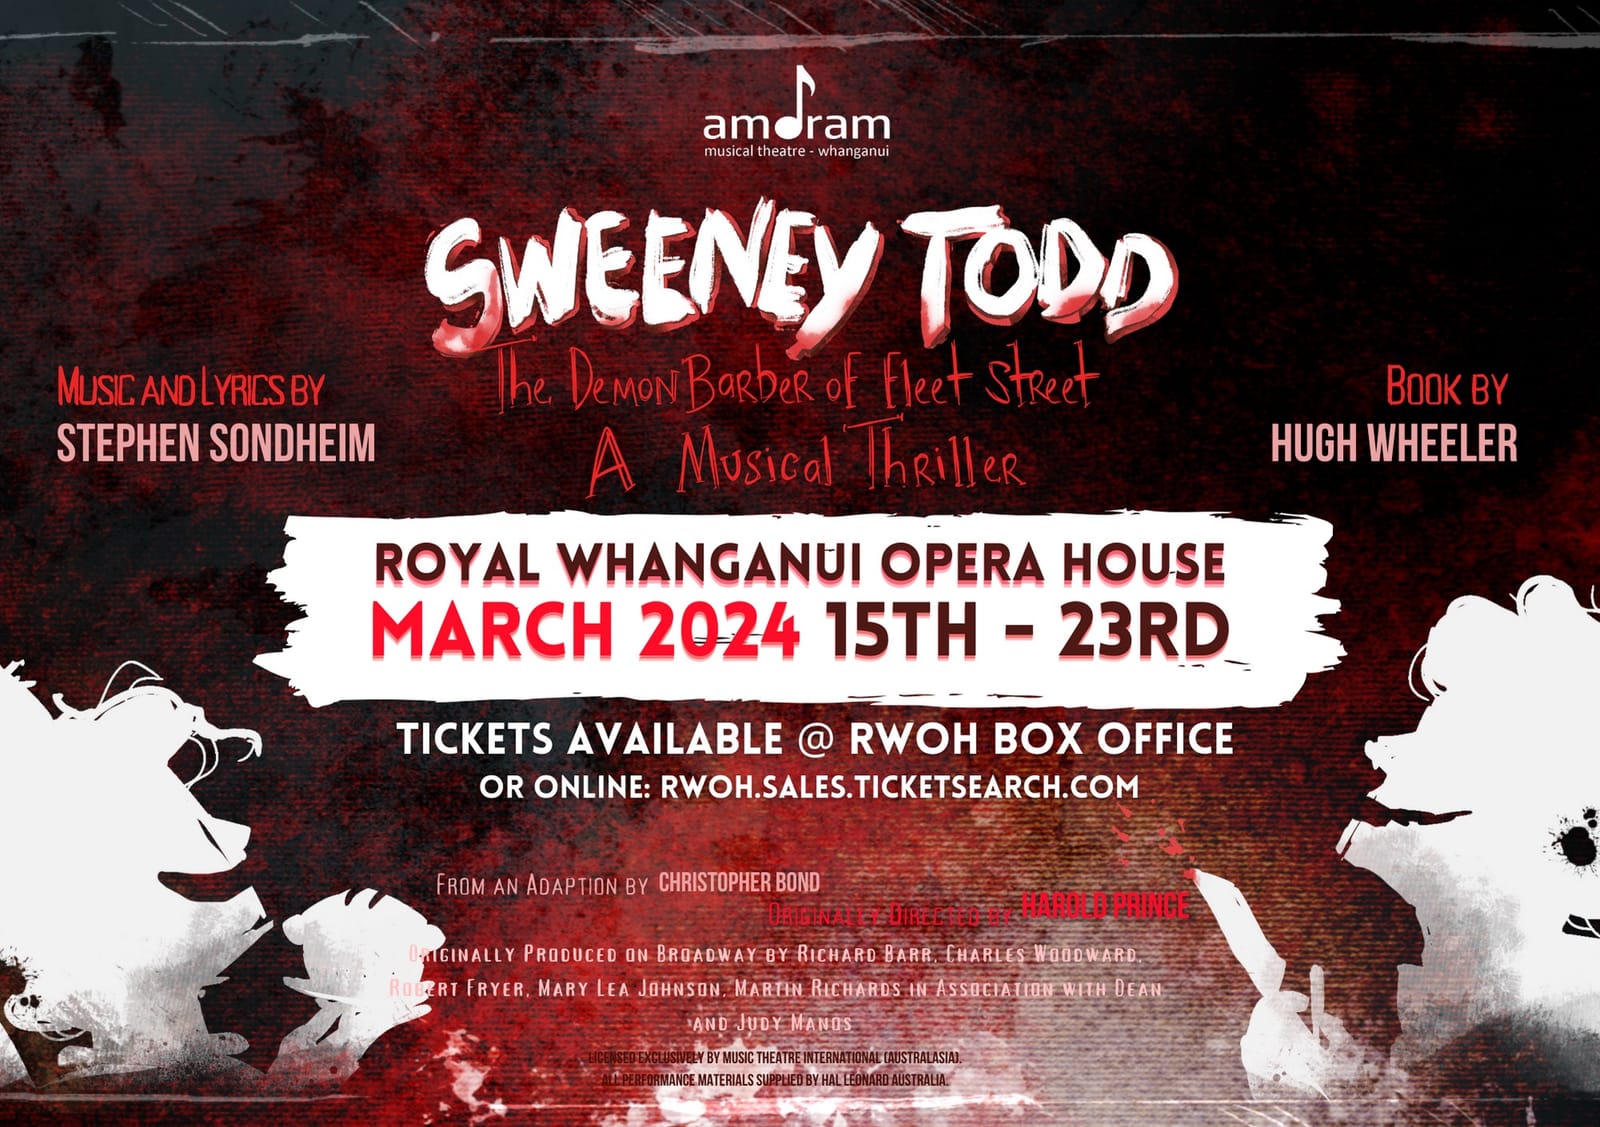 Sweeney Todd 2024 Tickets on Sale